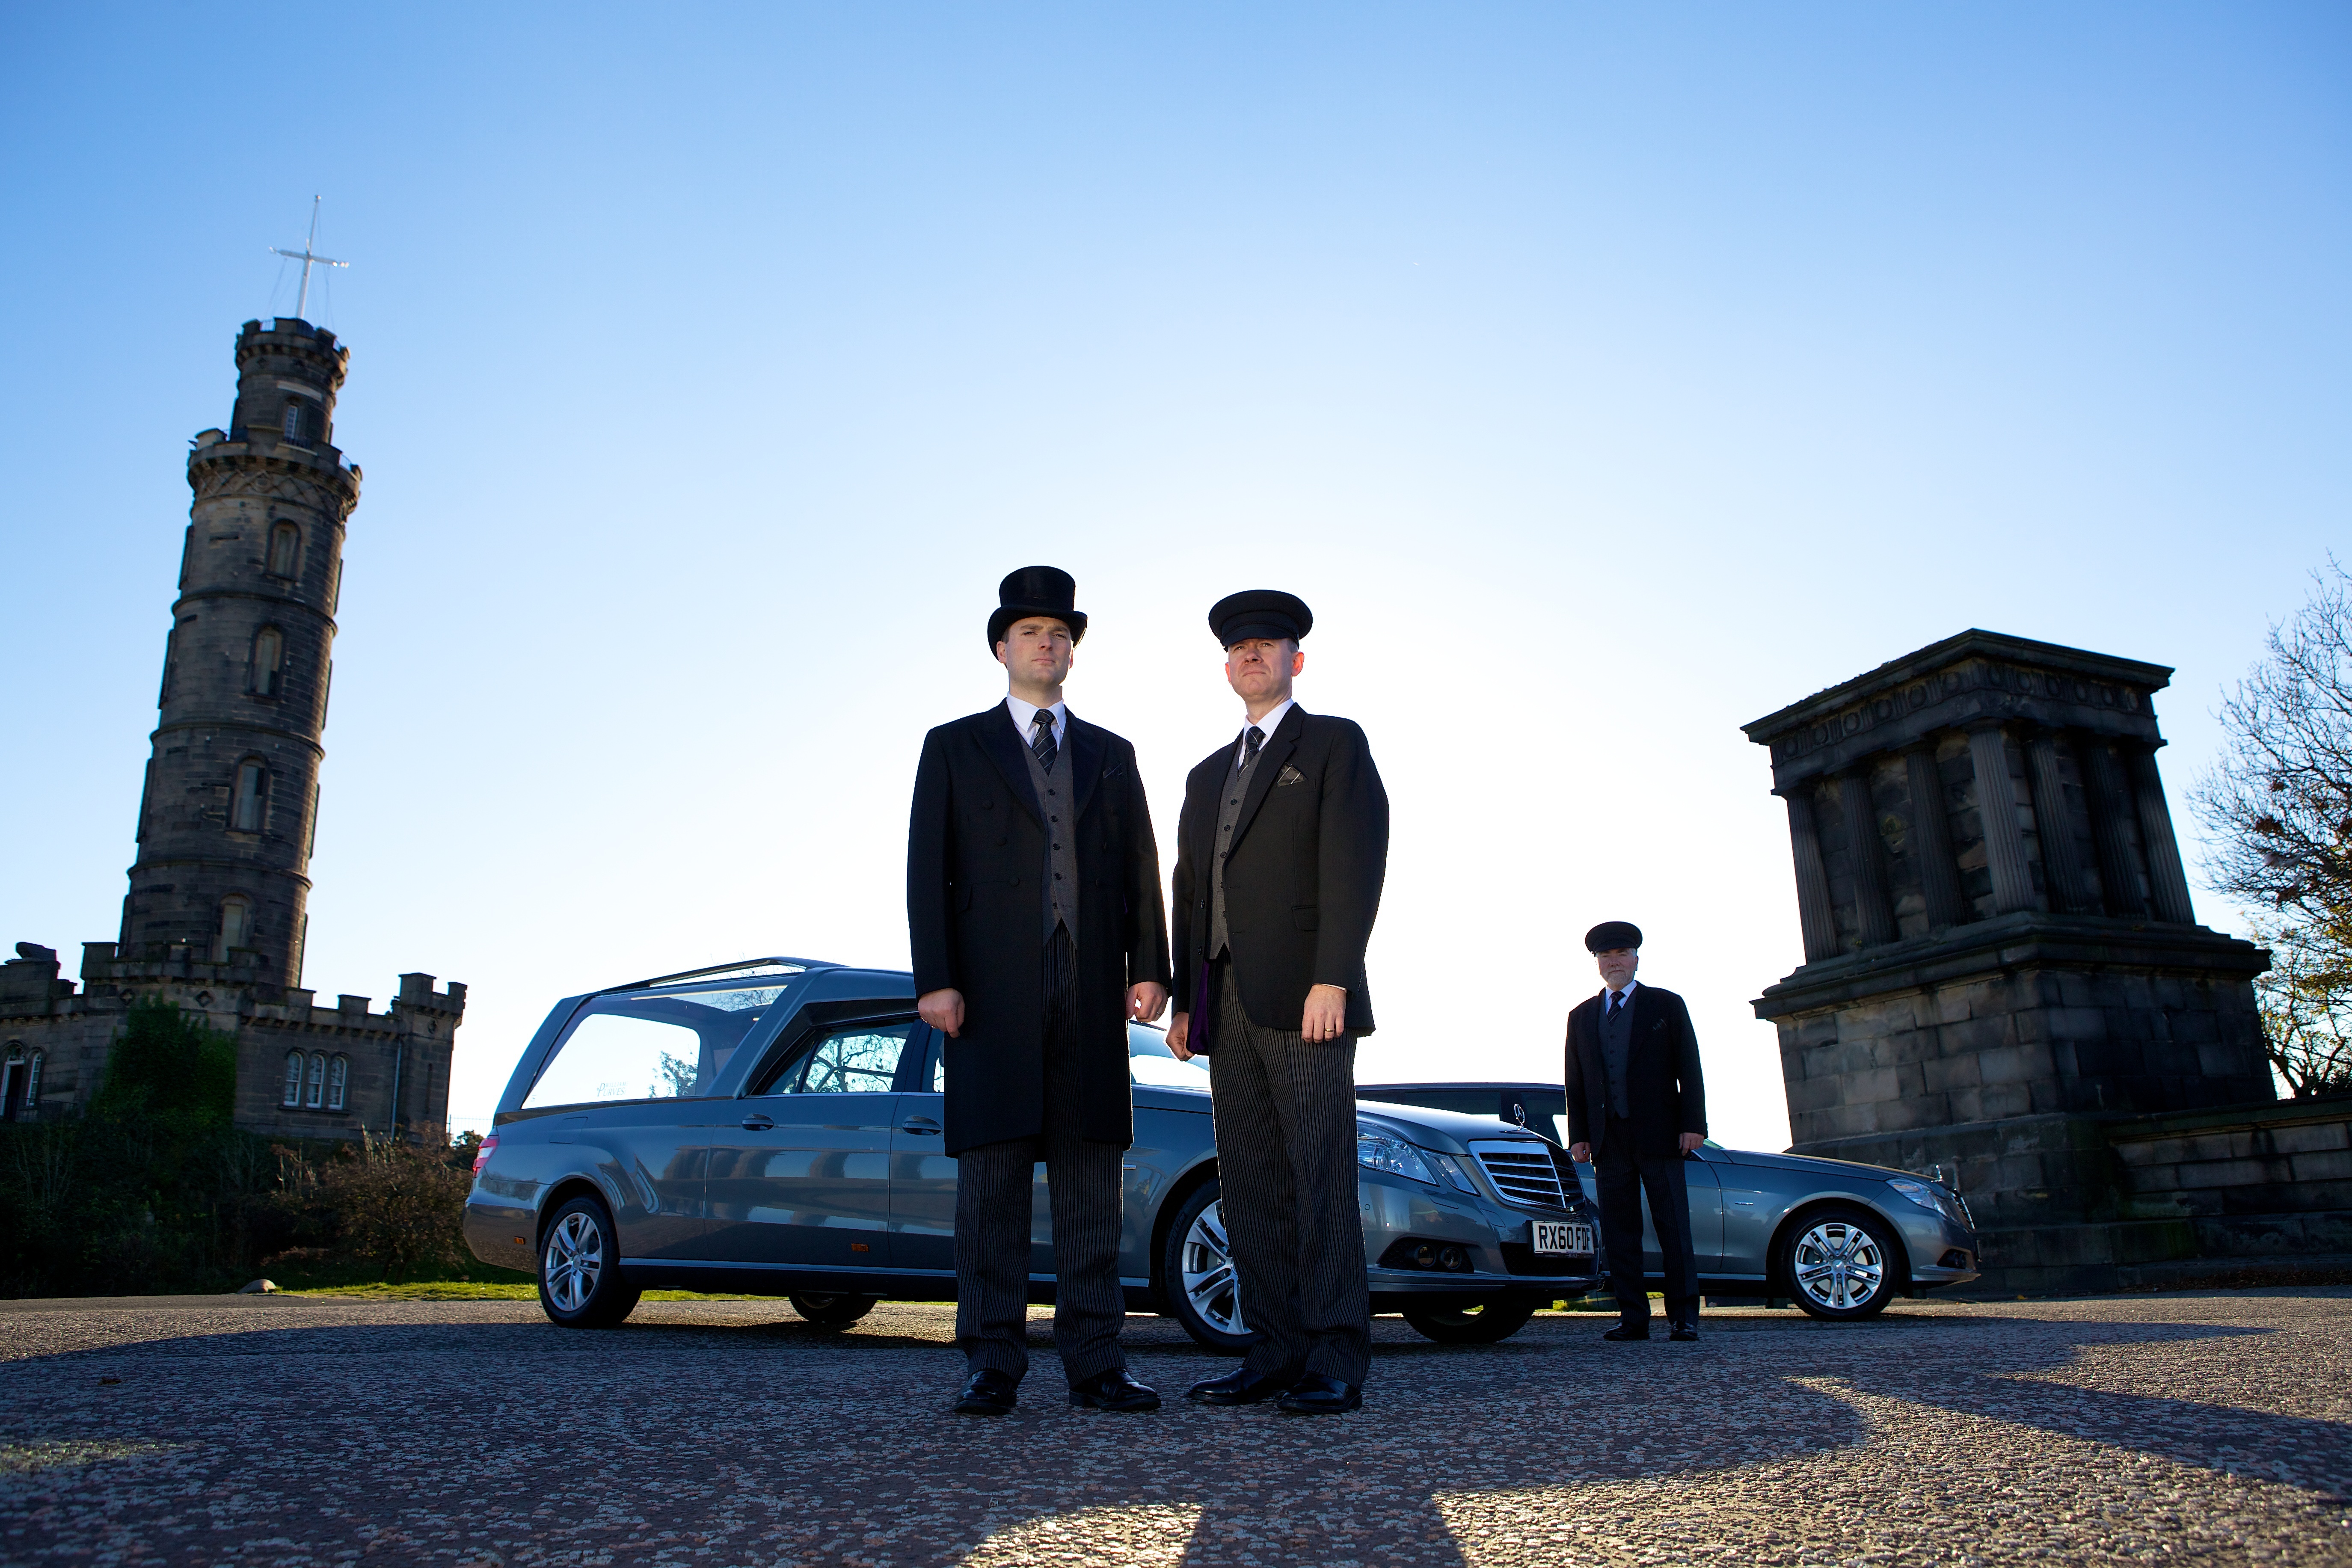 Superior UK and William Purves Funeral Directors: a 10-year partnership